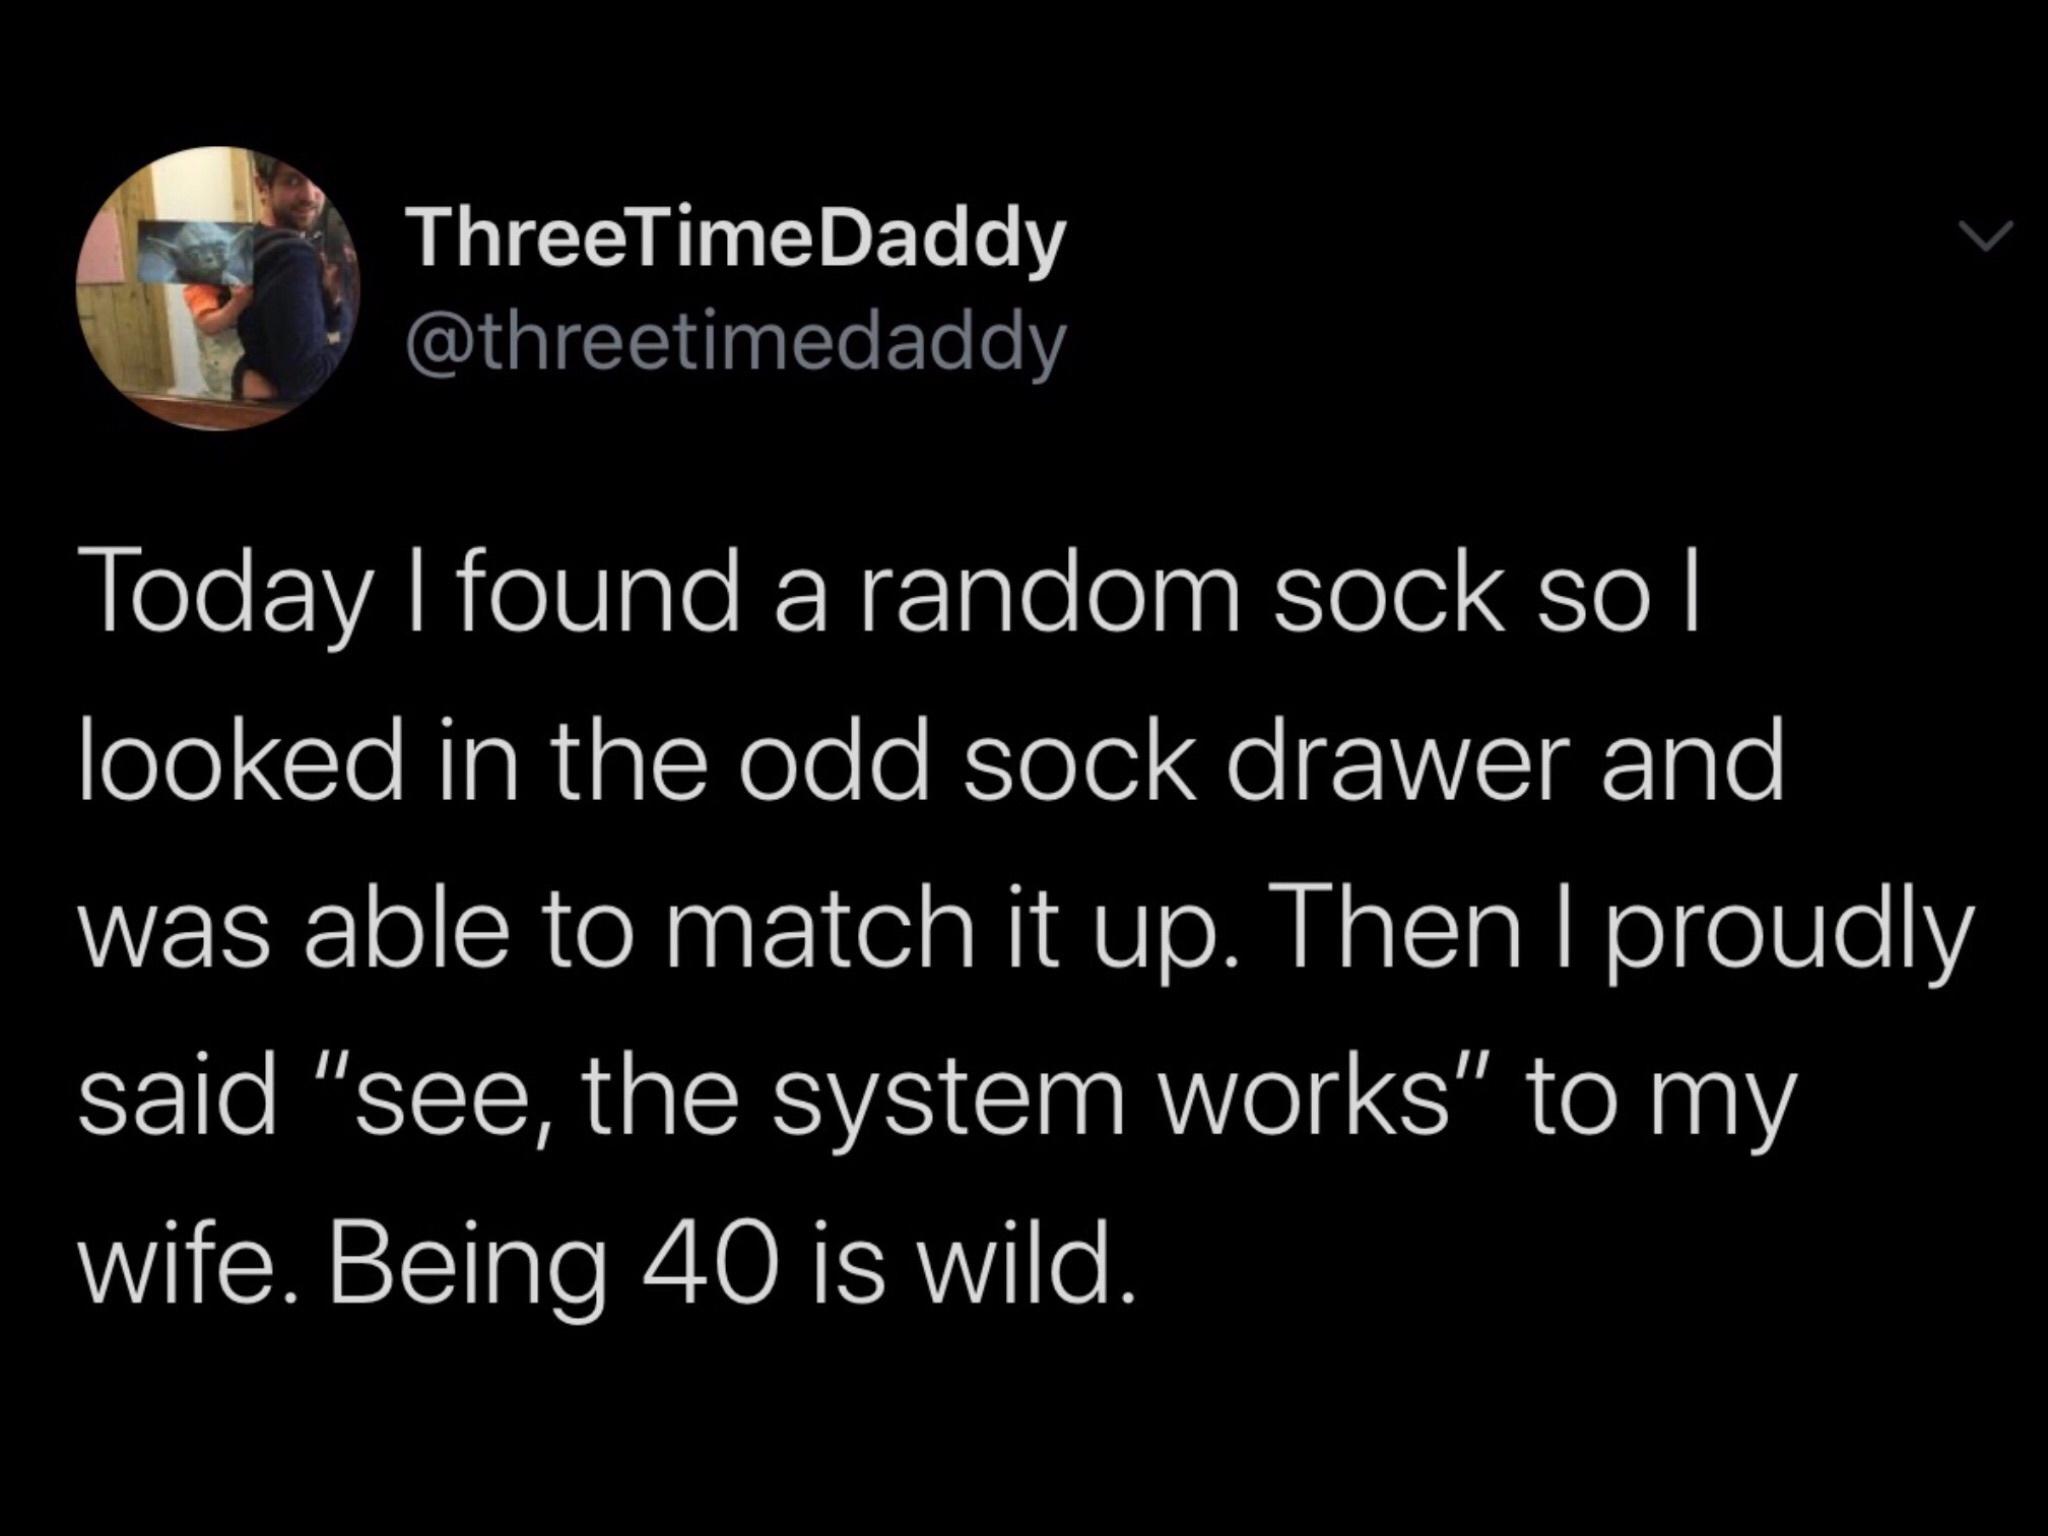 Funny Tweets - men who complain about not being able - I found a random sock so | looked in the odd sock drawer and was able to match it up. Then I proudly said